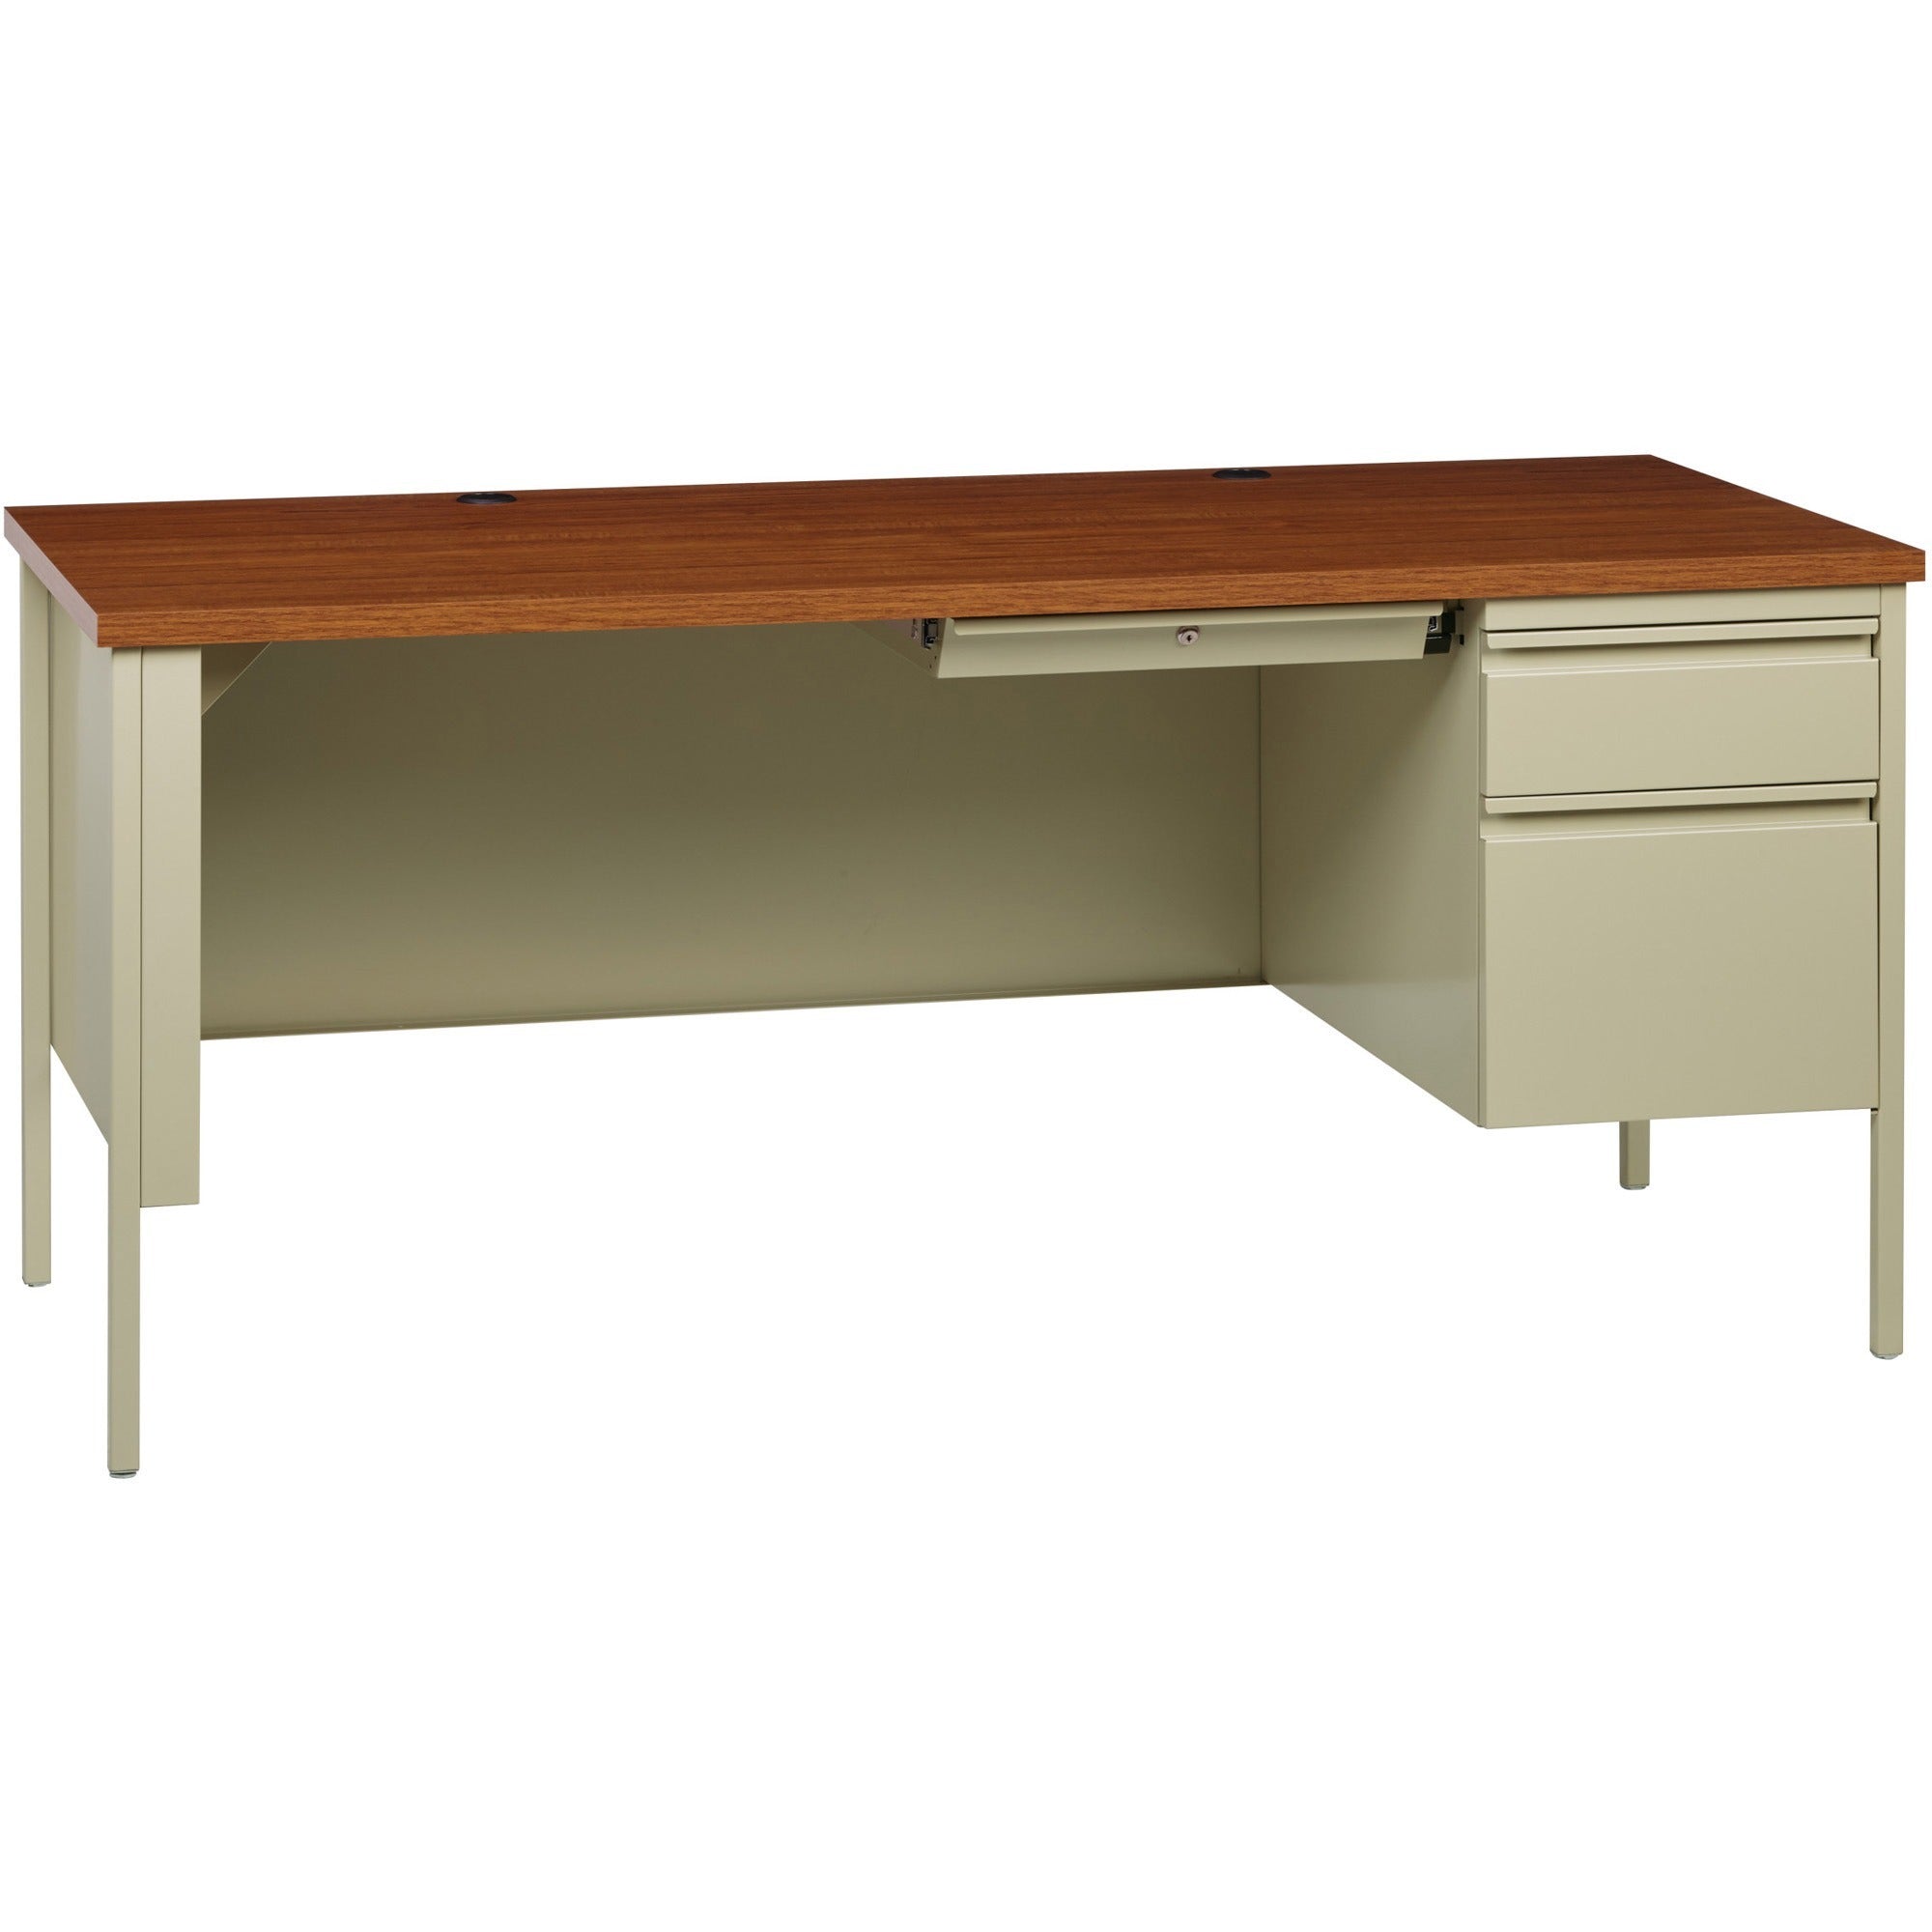 lorell-fortress-series-66-right-pedestal-desk-for-table-topoak-laminate-rectangle-top-30-table-top-length-x-66-table-top-width-x-113-table-top-thickness-2950-height-assembly-required-oak-putty-steel-1-each_llr66904 - 1